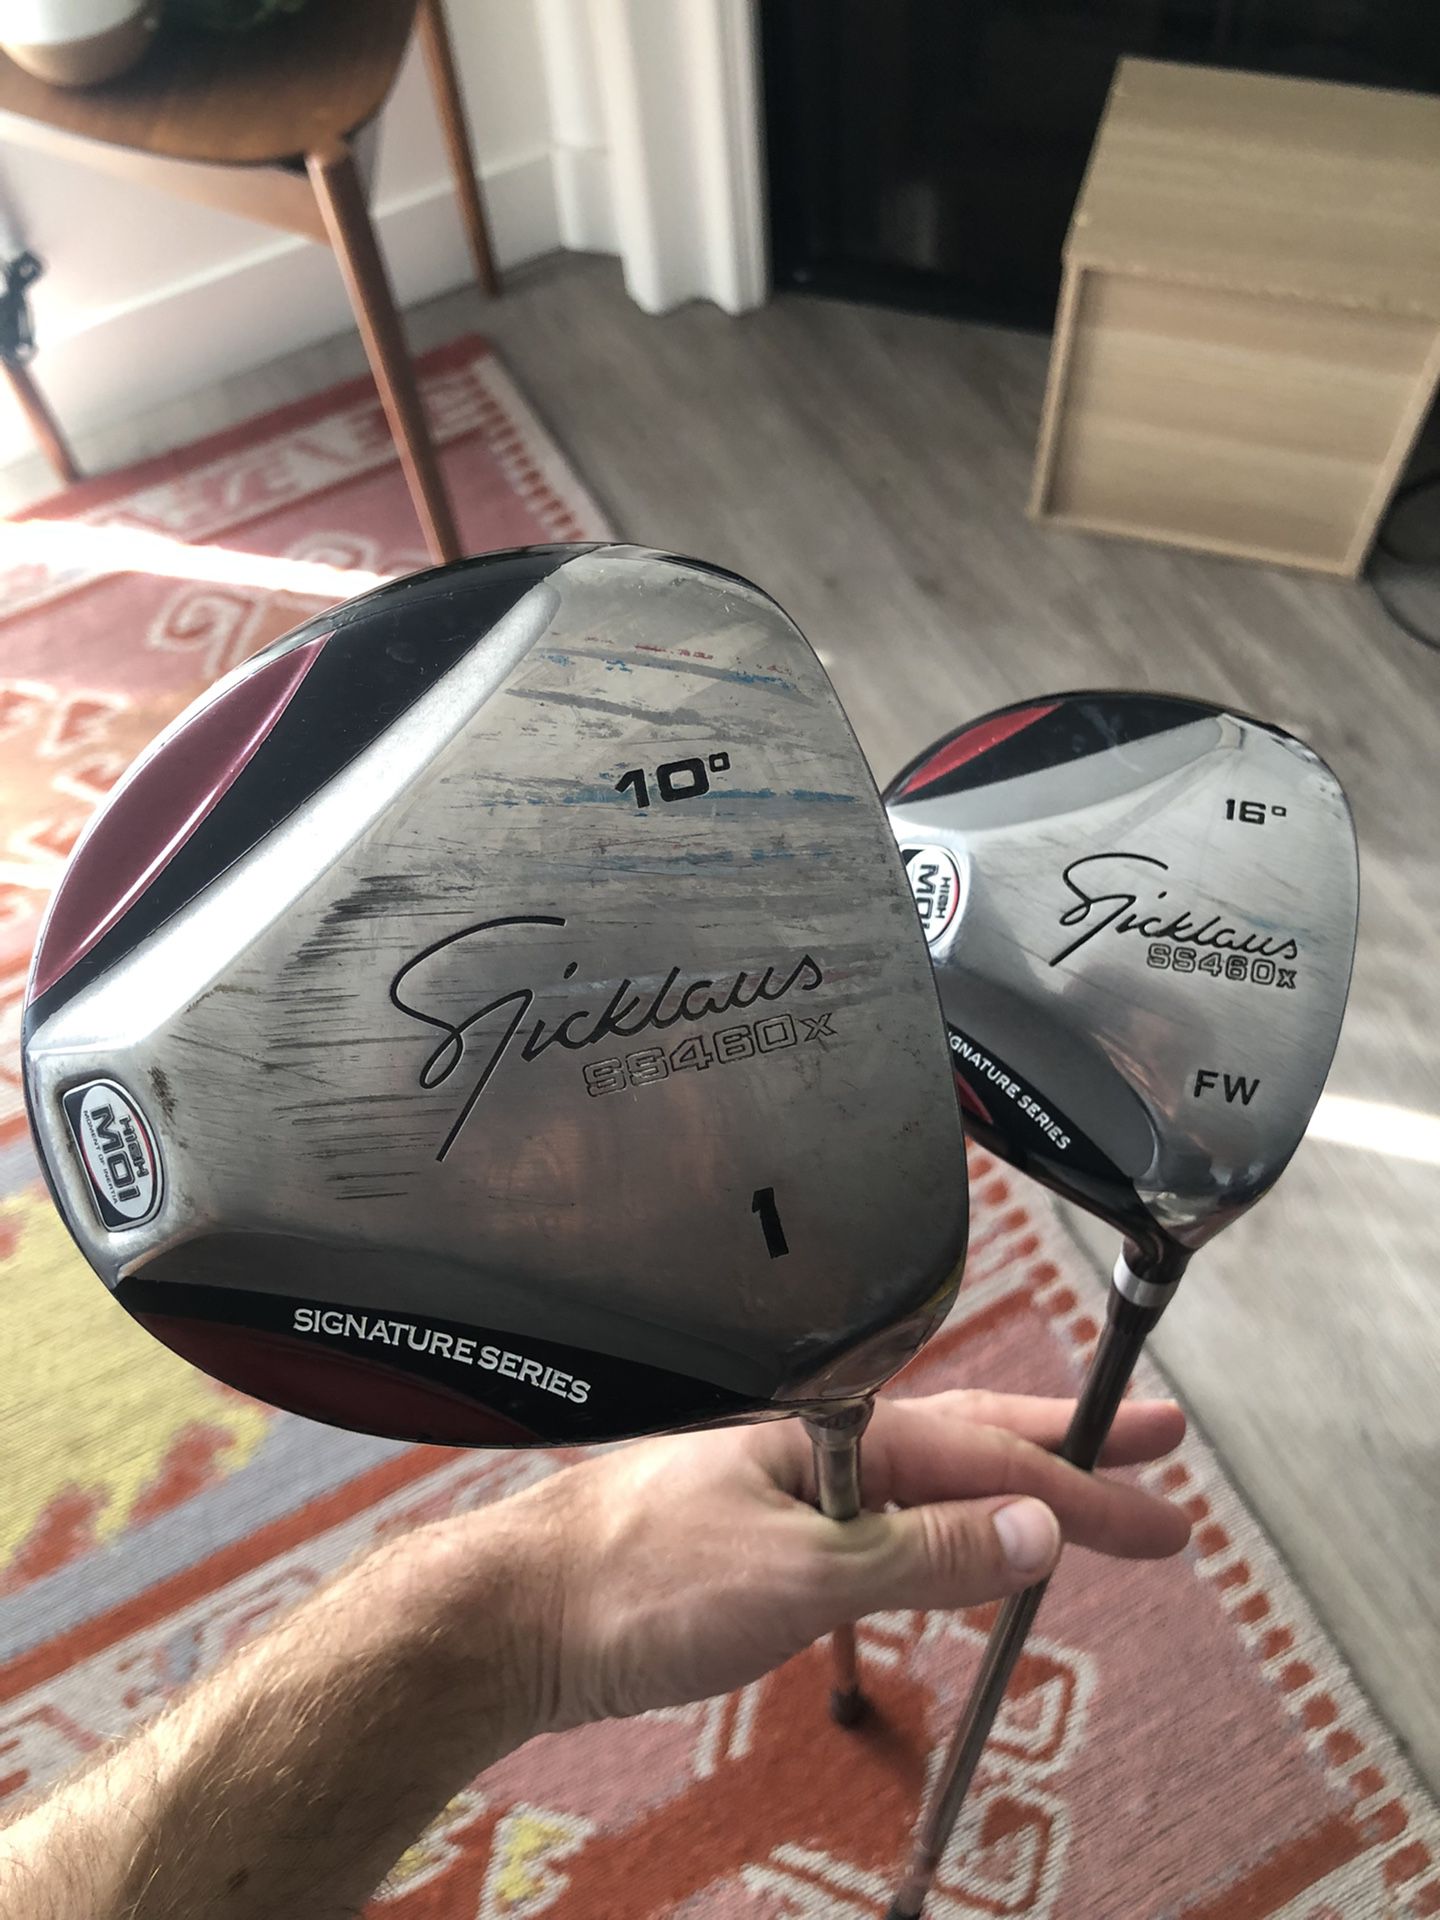 Nicklaus Driver and Fairway Wood